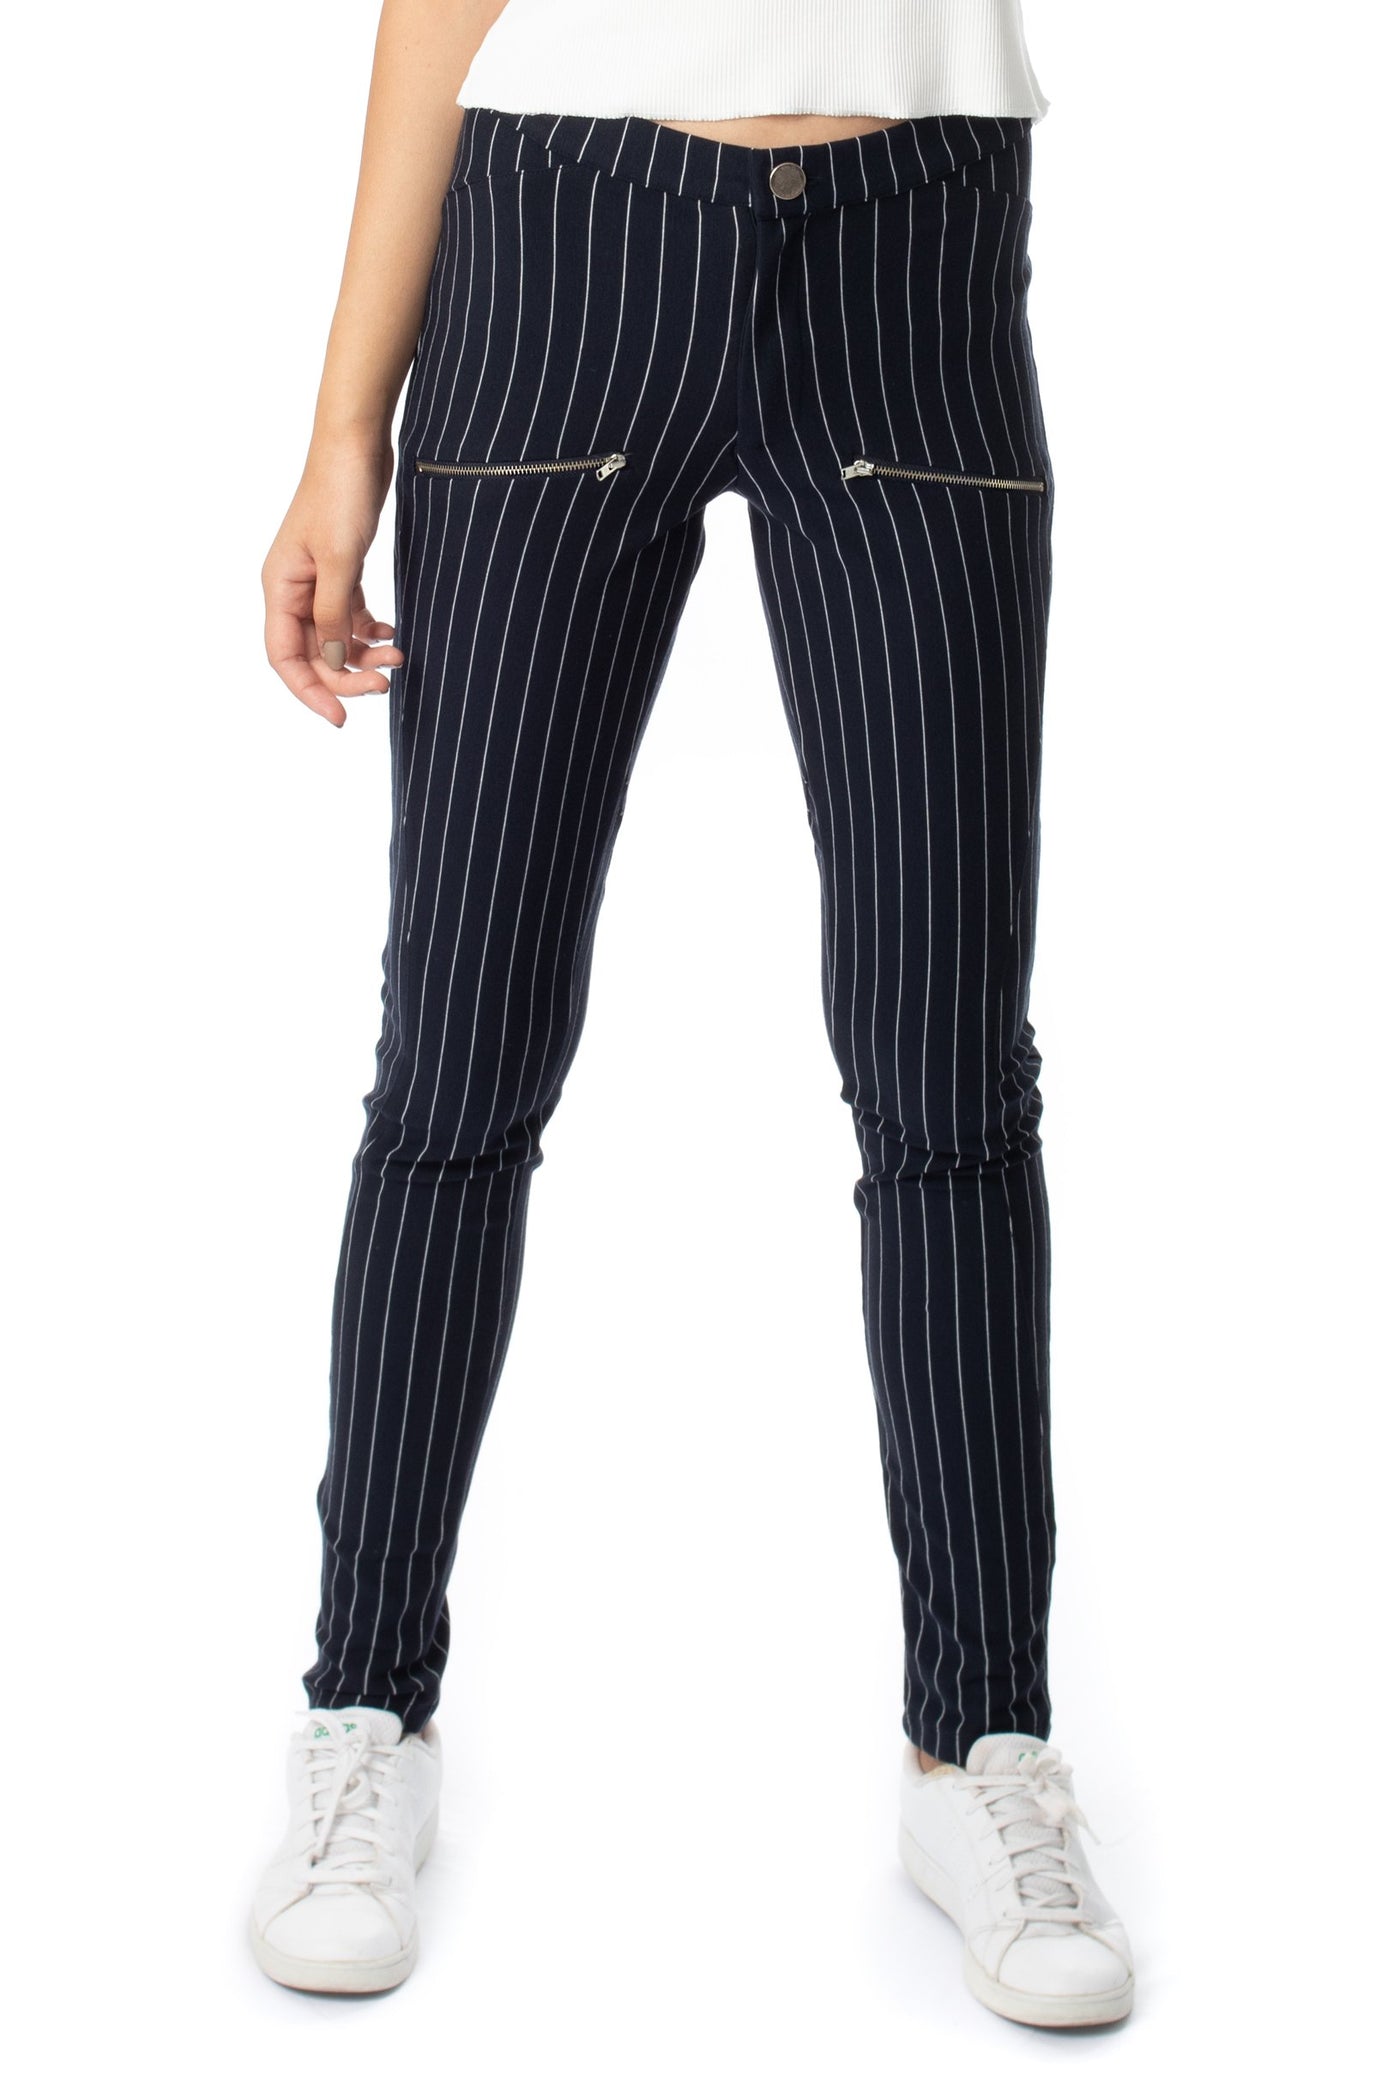 chassca pant with stripes - Breakmood